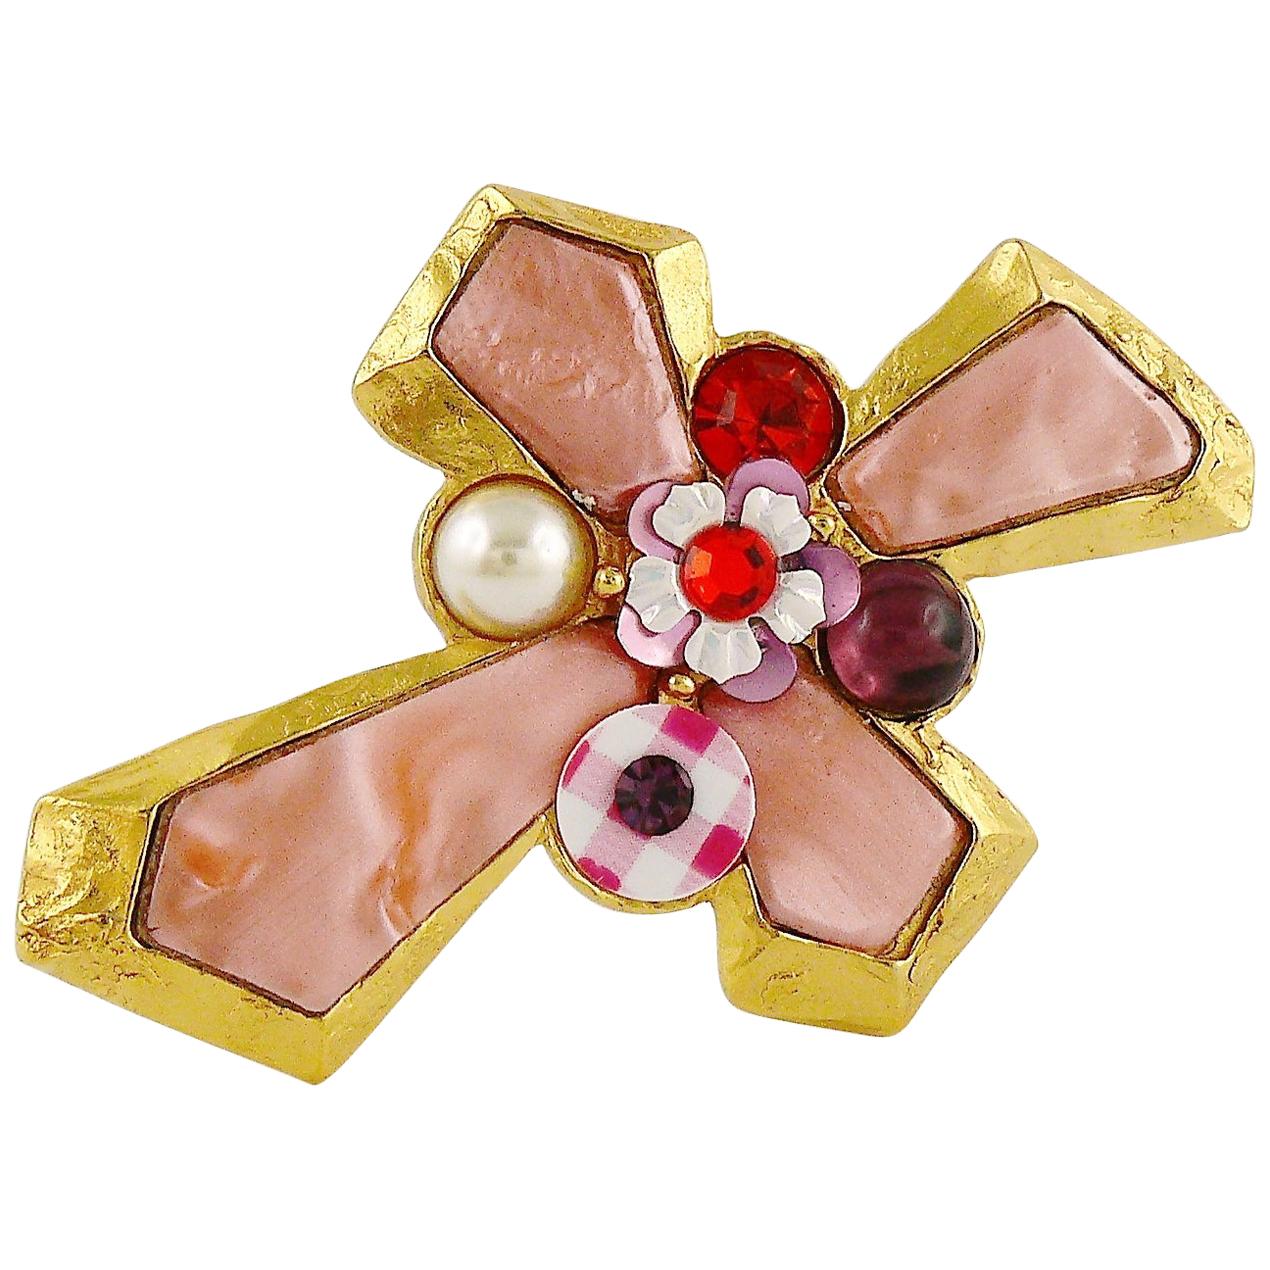 Christian Lacroix Vintage Gold Toned Jewelled Cross Brooch Pendant